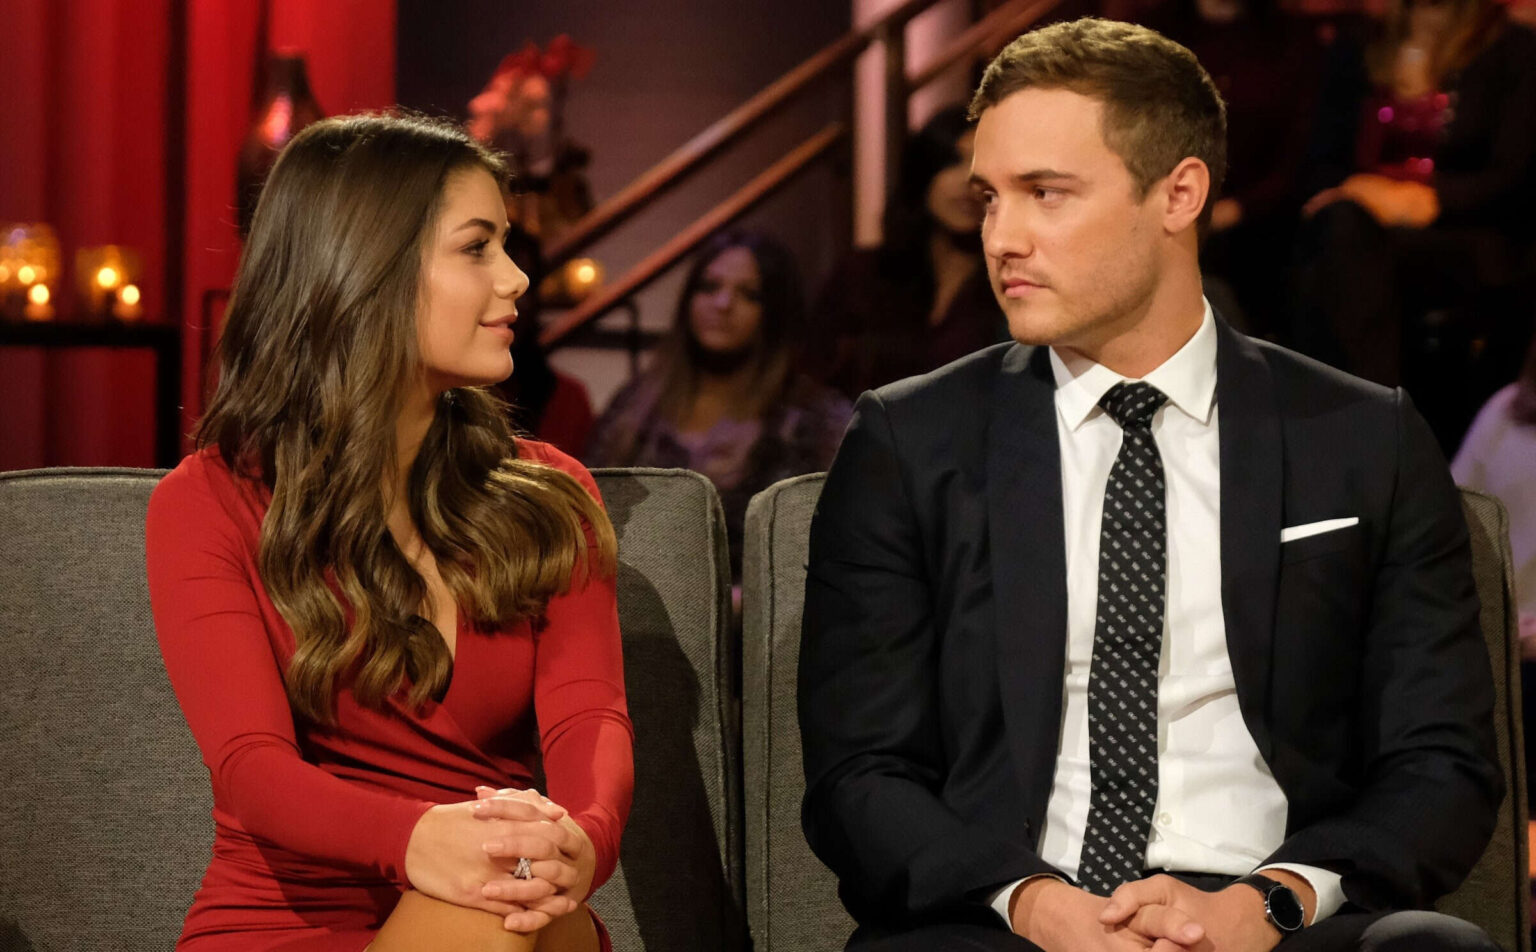 Hot men, drama, and indecision . . . oh my! Past seasons of 'The Bachelor' have left viewers shocked. Look back on the moments that really took the rose.